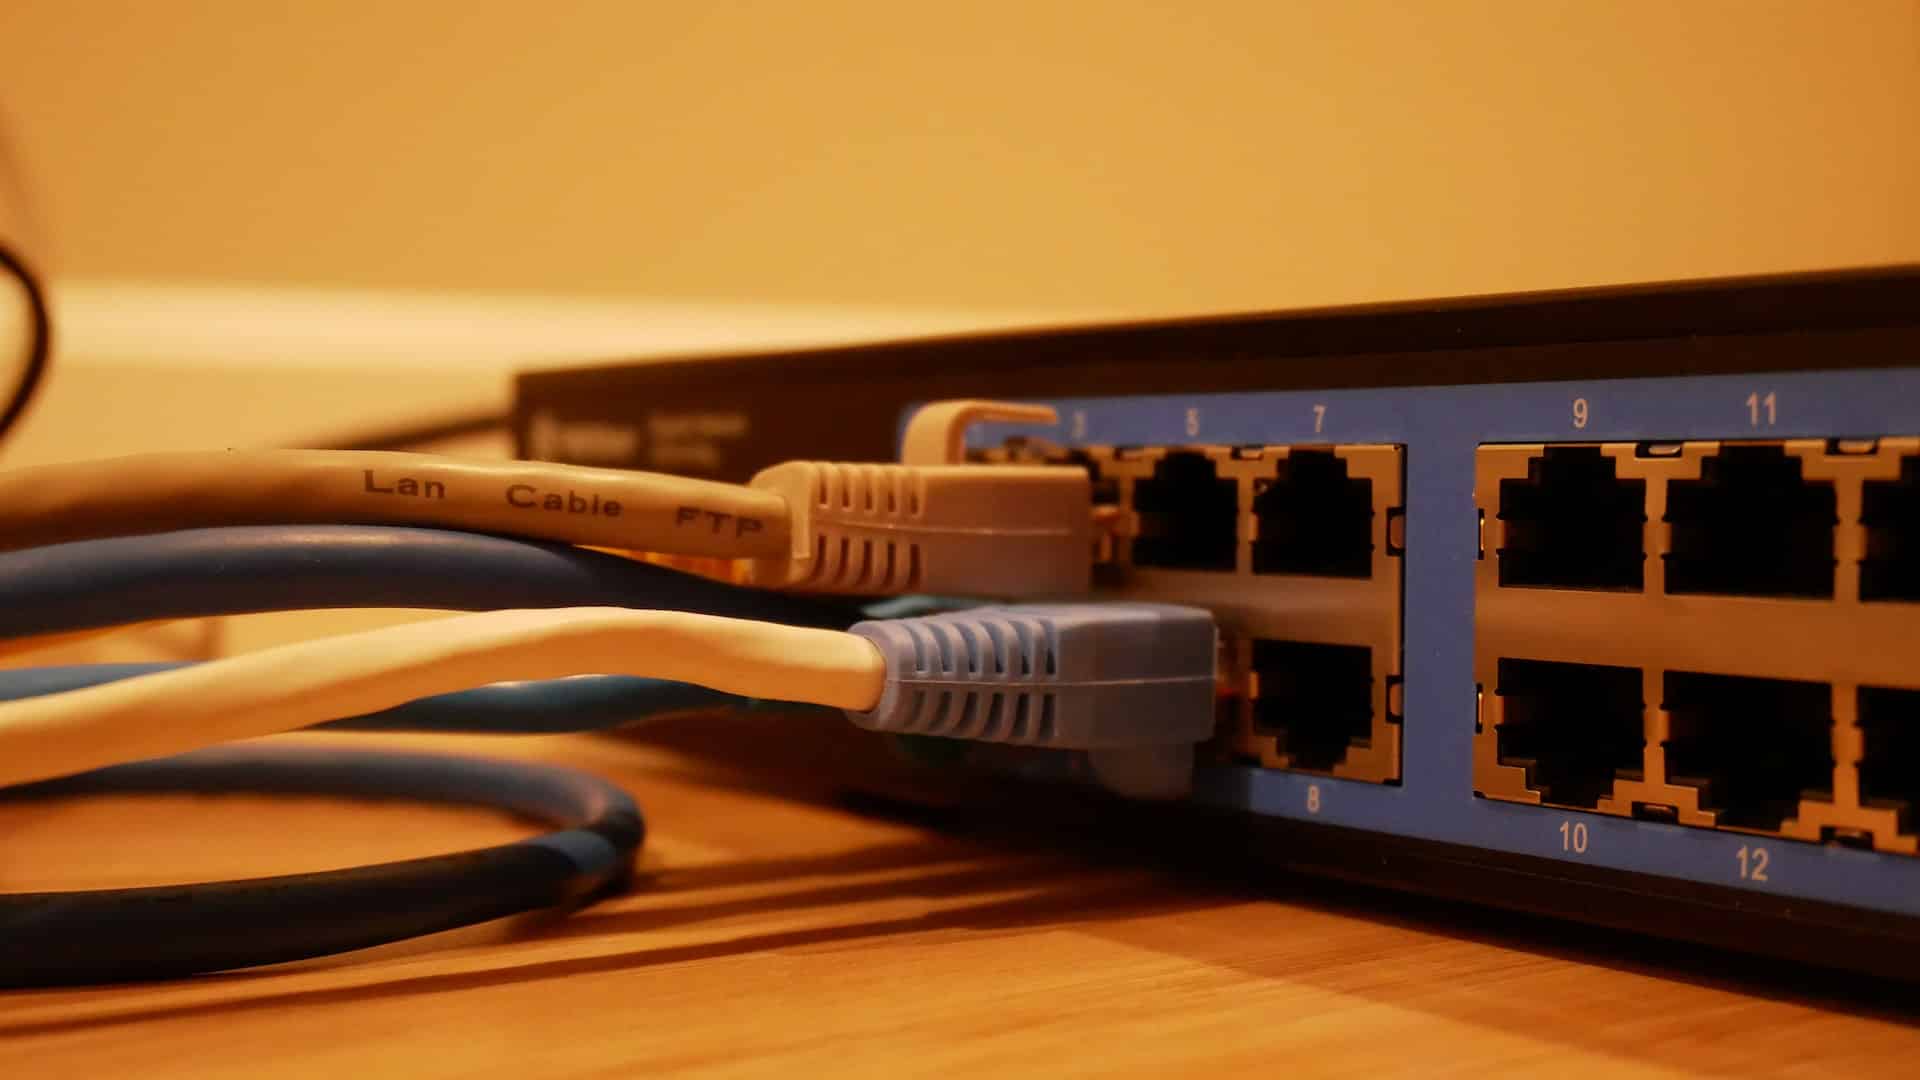 More than 19,000 Cisco Router Solutions Detected to be Vulnerable to RCE Attacks